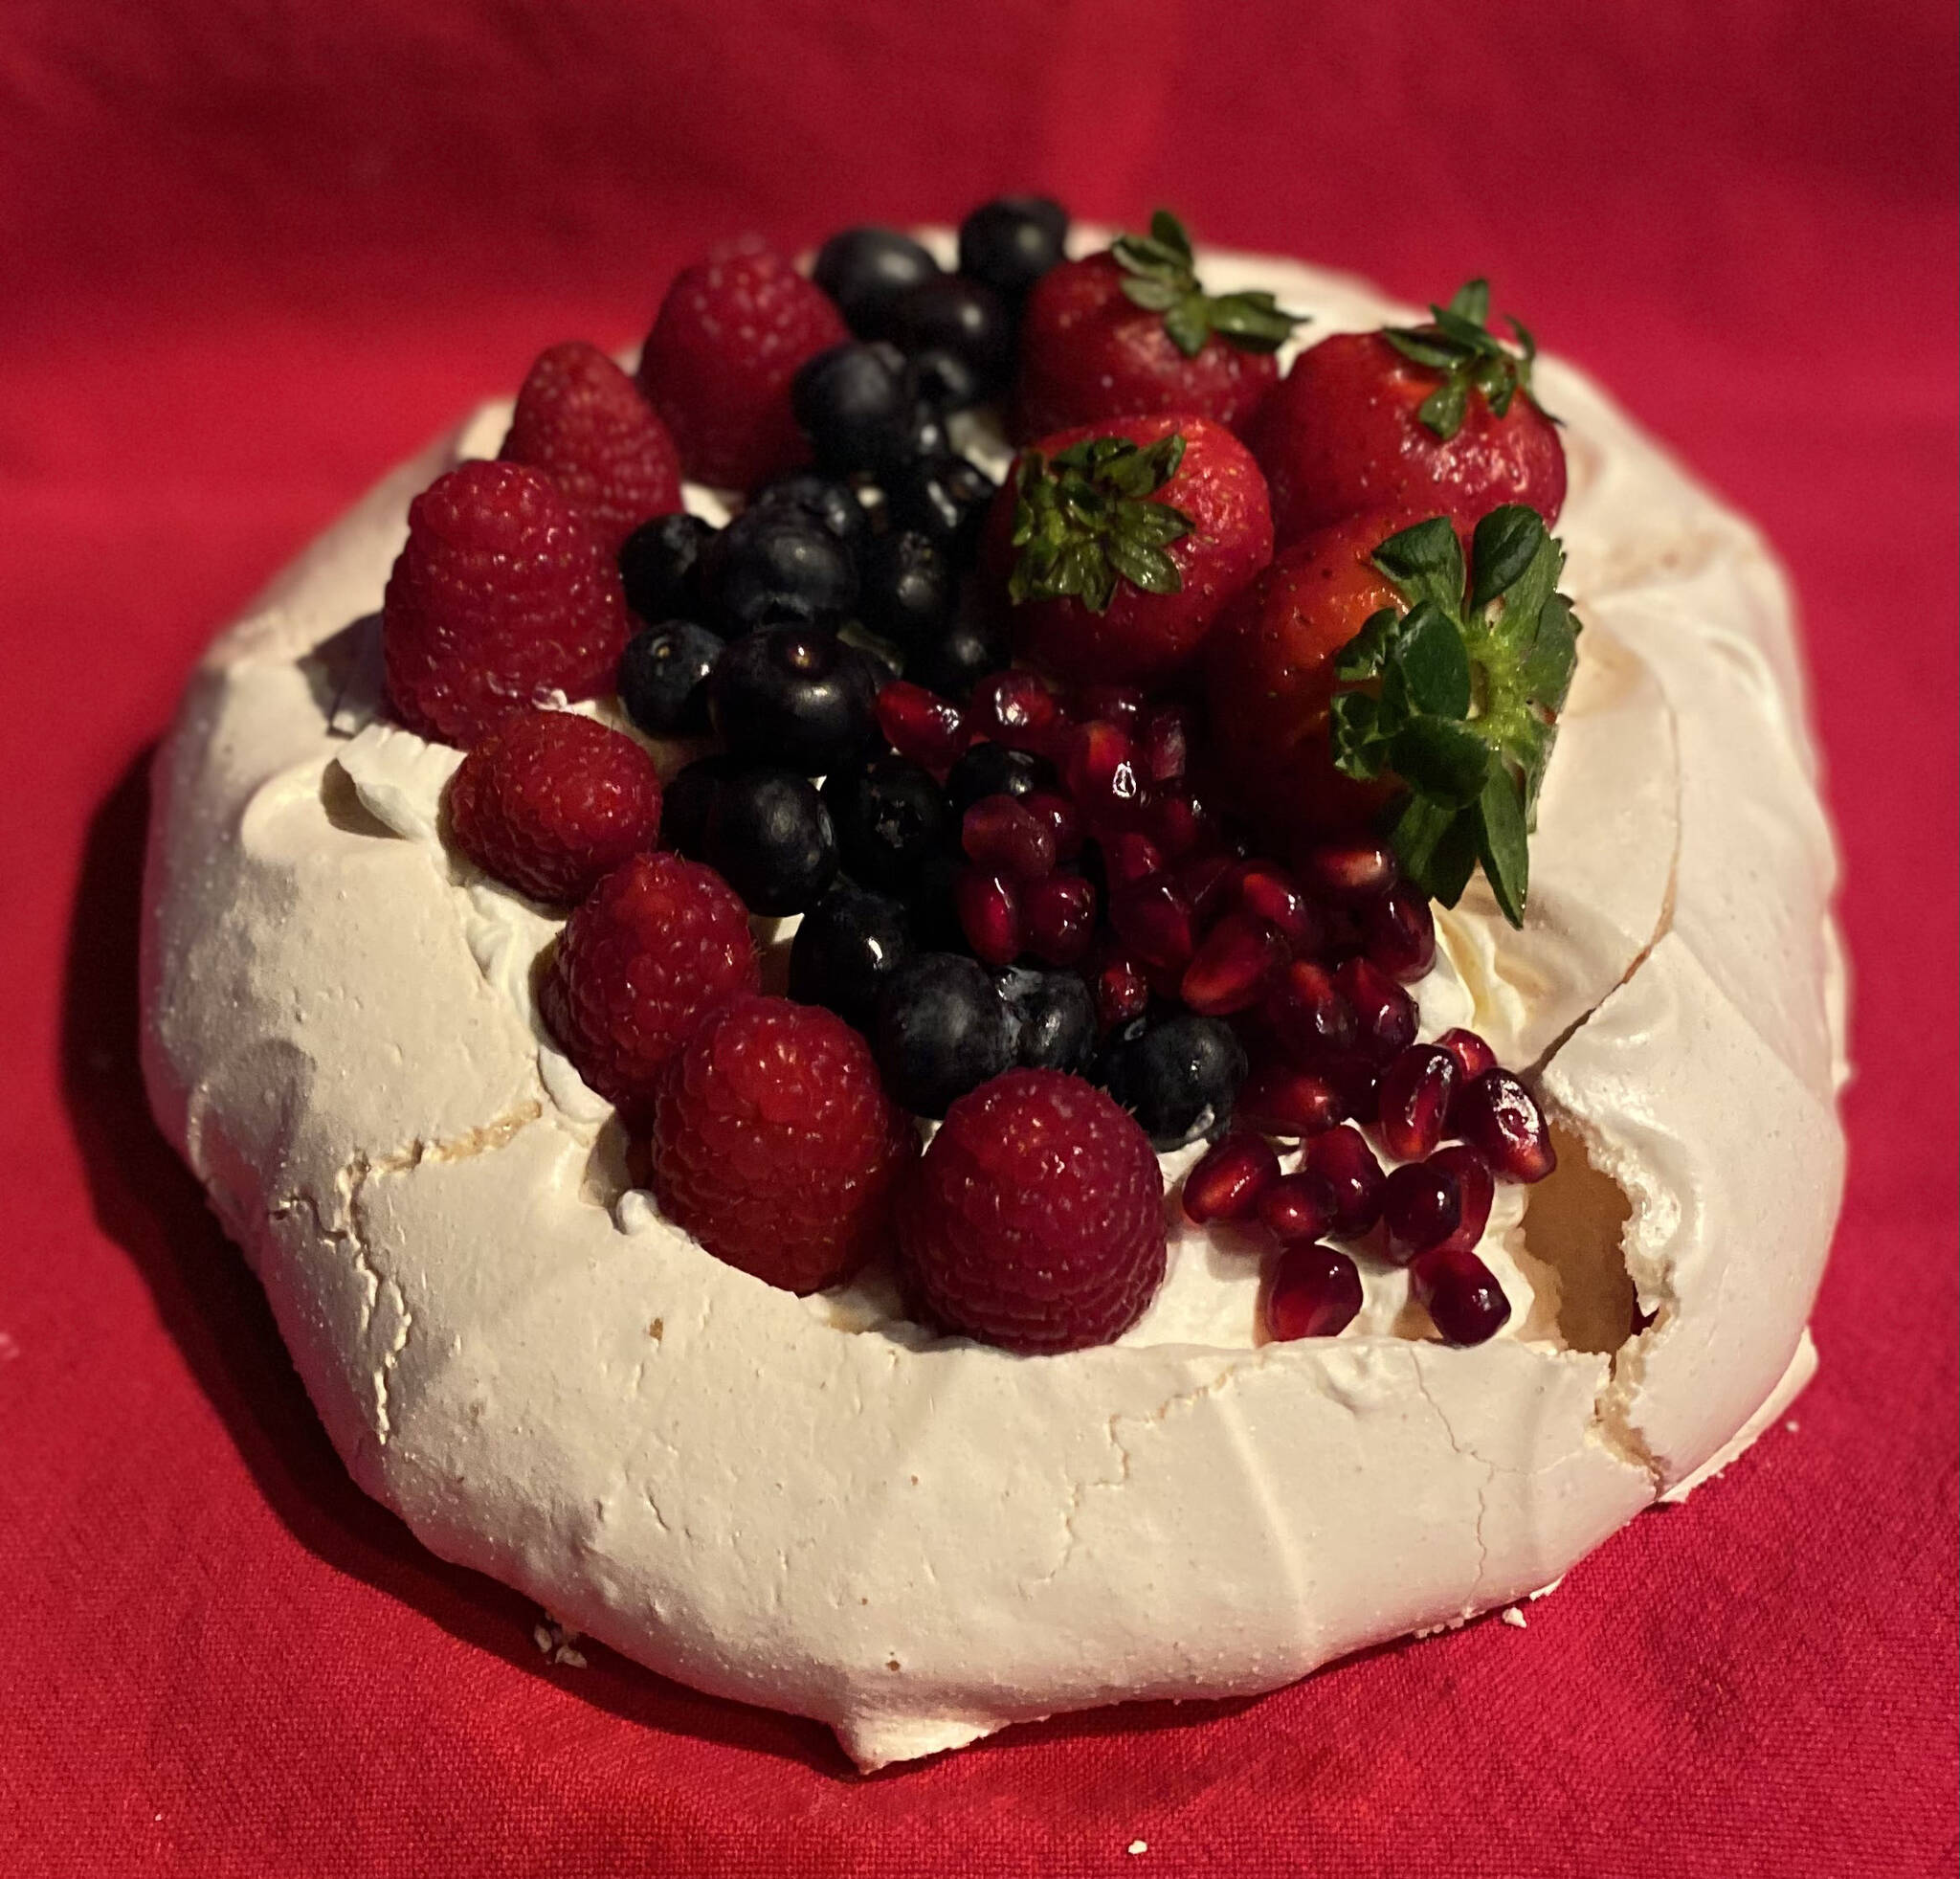 The merigue-based pavlova is a lighter-than-air dessert than can be topped with an assortment of fruits. (Photo by Tressa Dale/Peninsula Clarion)